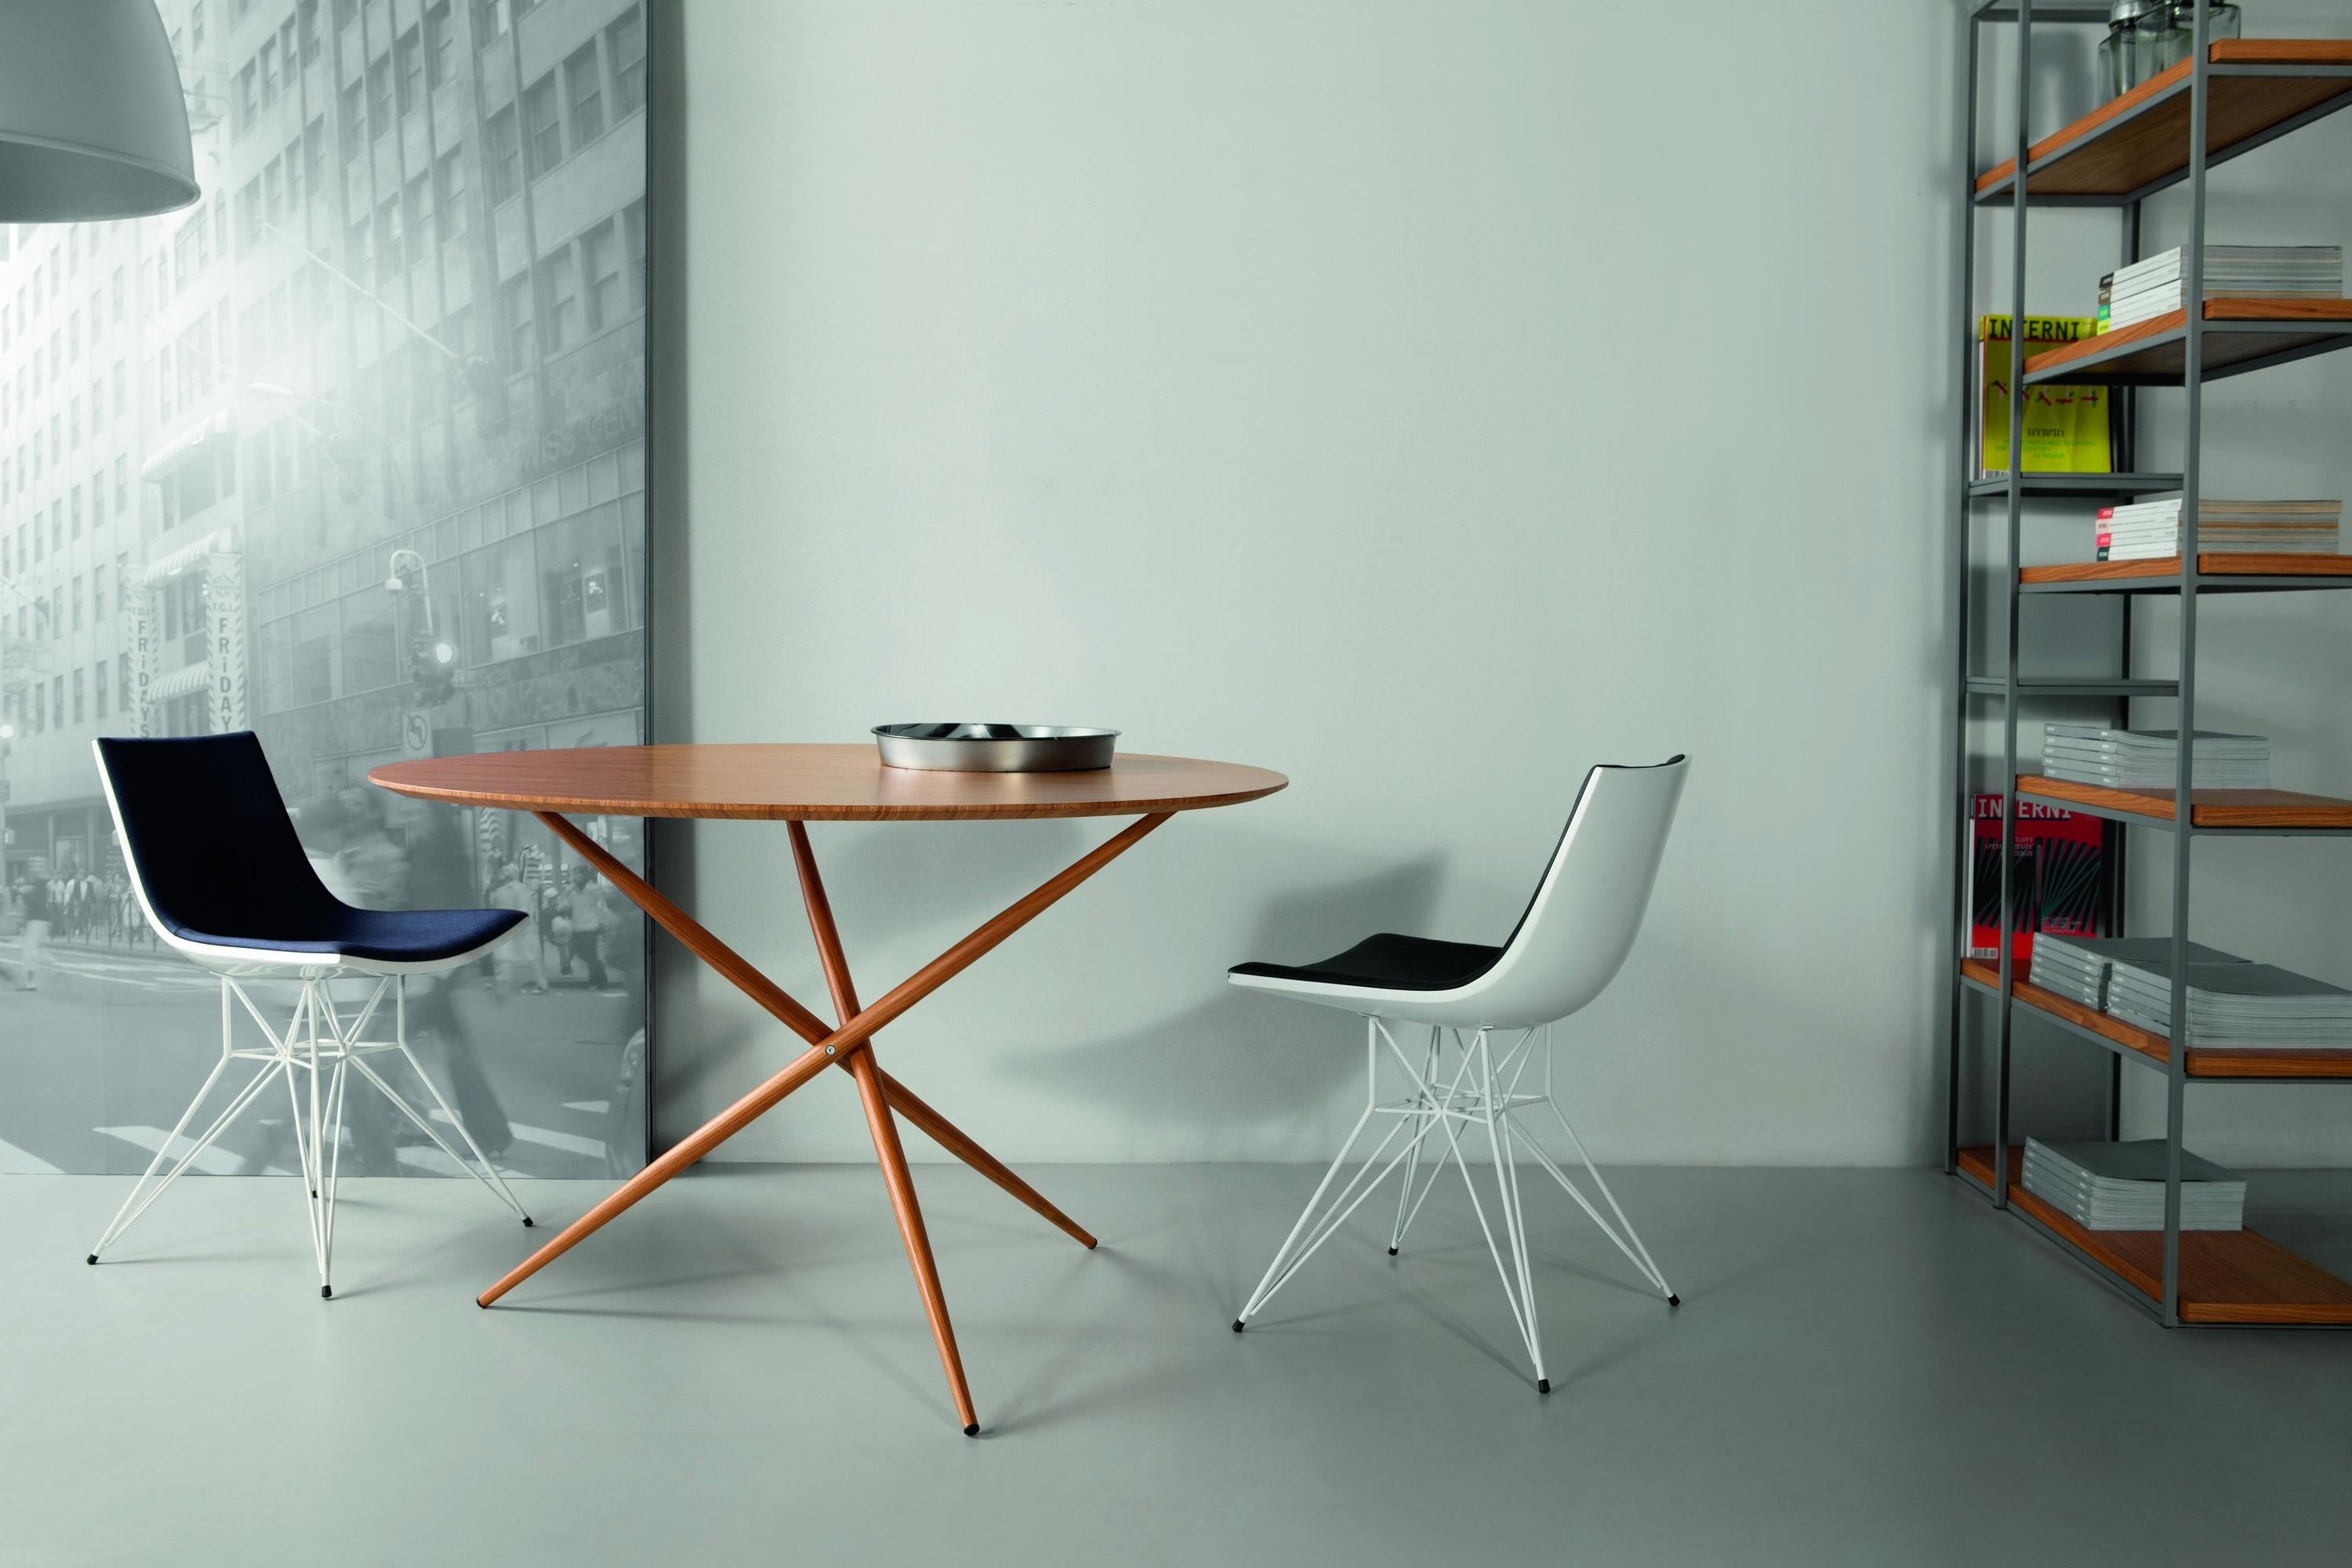 Pégasus Dining Table by Doimo Brasil
Dimensions: D 80 x H 75 cm 
Materials: Base: Veneer, Top: Veneer. 

Also available in D 80, D 100, D 120 cm. Please contact us.

With the intention of providing good taste and personality, Doimo deciphers trends